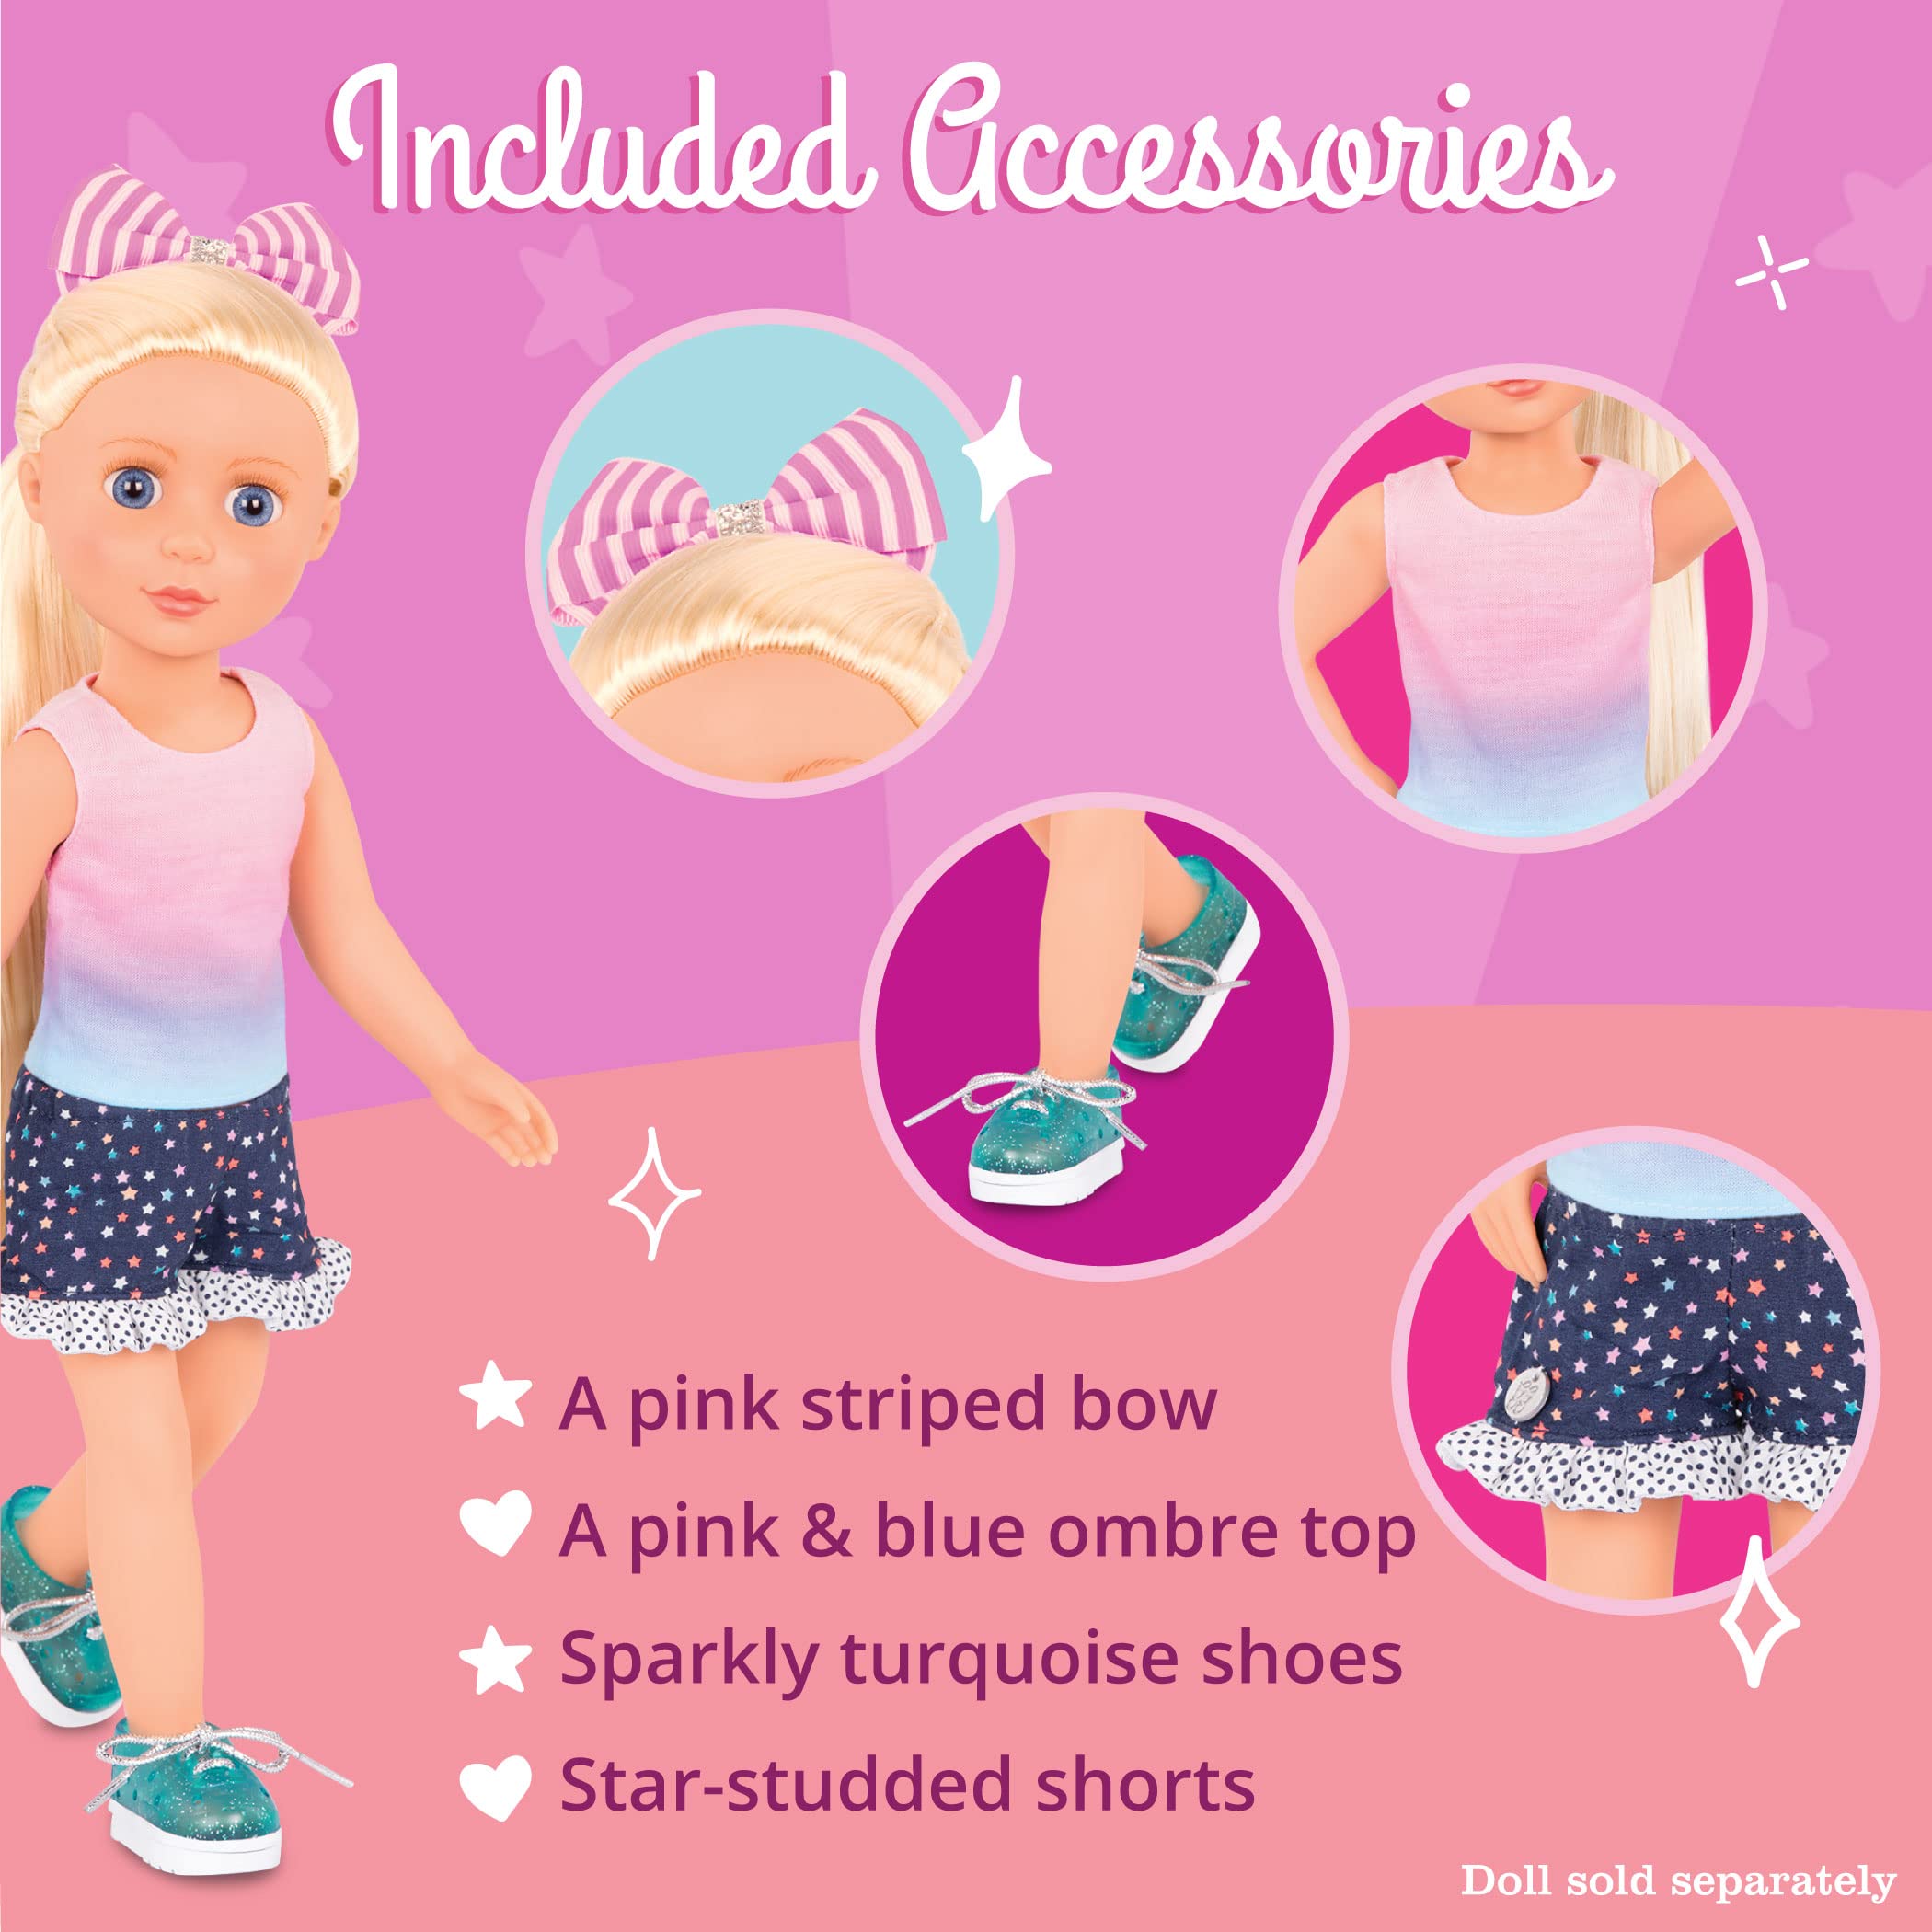 Glitter Girls – 14-inch Doll Clothes – 4pcs Starry Outfit – Colorful Top & Polka Dot Shorts – Glittery Shoes & Hair Bow – 3 Years + – Twinkle Like A Star